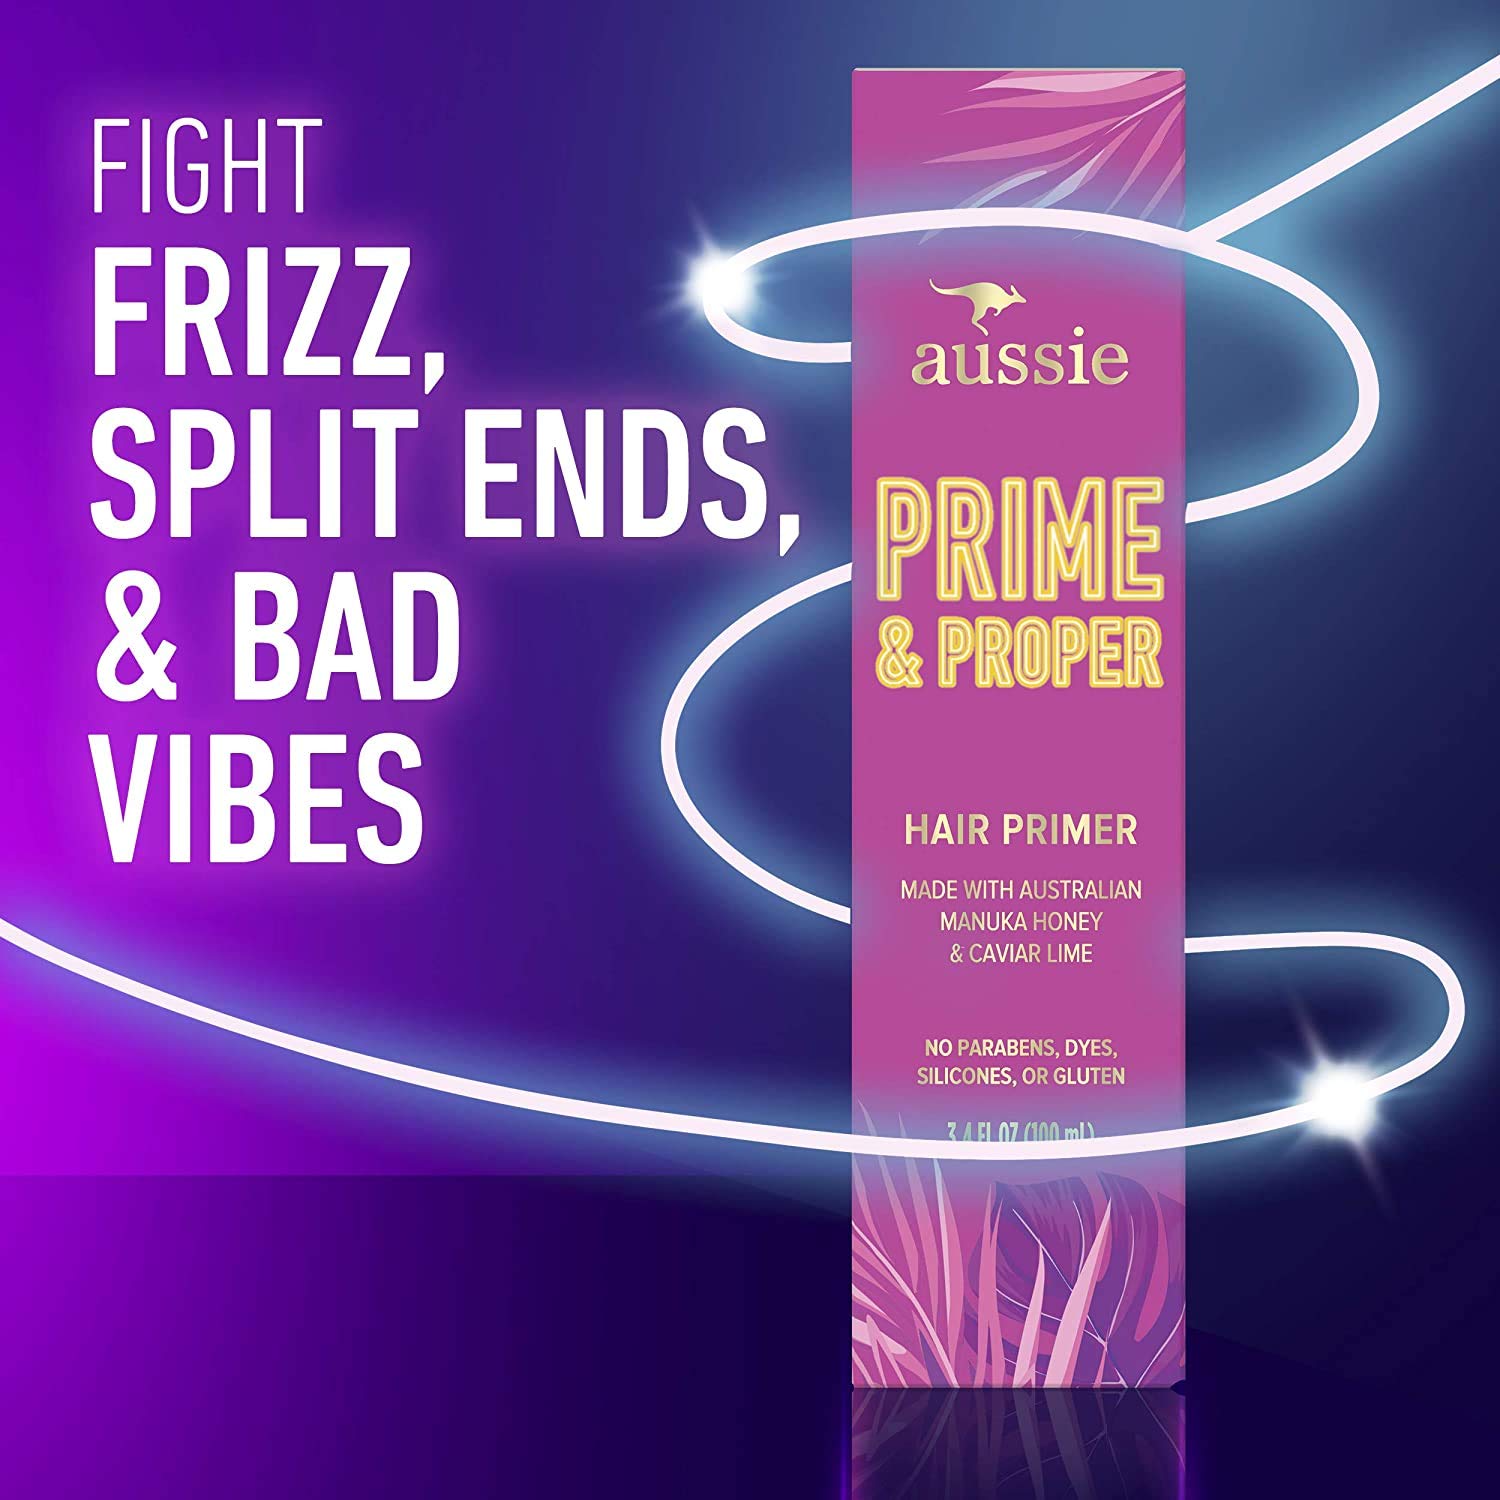 Aussie Prime & Proper Hair Primer Treatment, Heat Protectant Spray, Paraben & Dye Free, Infused with Australian Manuka Honey and Caviar Lime, RED, 3.4 Fl Oz